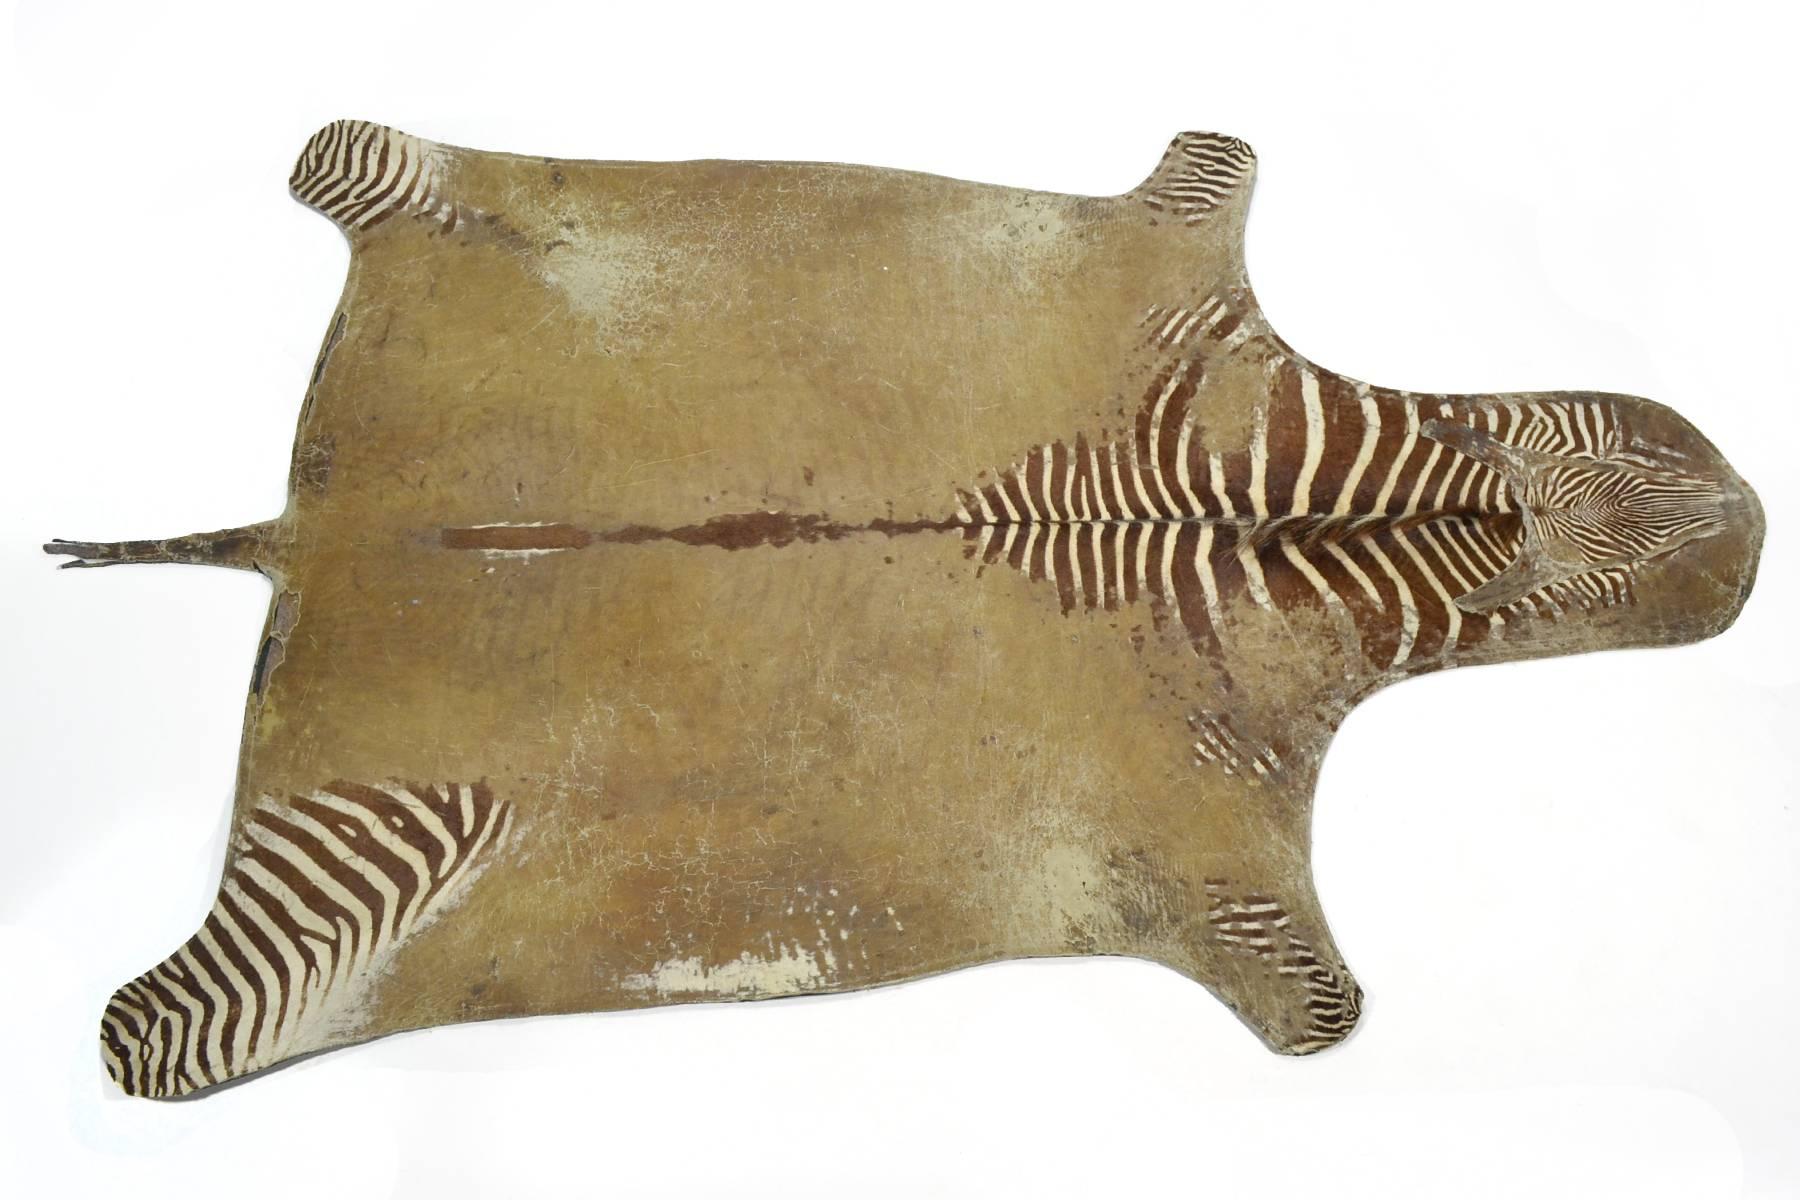 This exceptional Burchell zebra hide rug is uncommon for several reasons including its large size. Rather than a dark felt border around the perimeter, the edge is defined by the natural edge of the hide. It is nicely backed with a thick gray felt